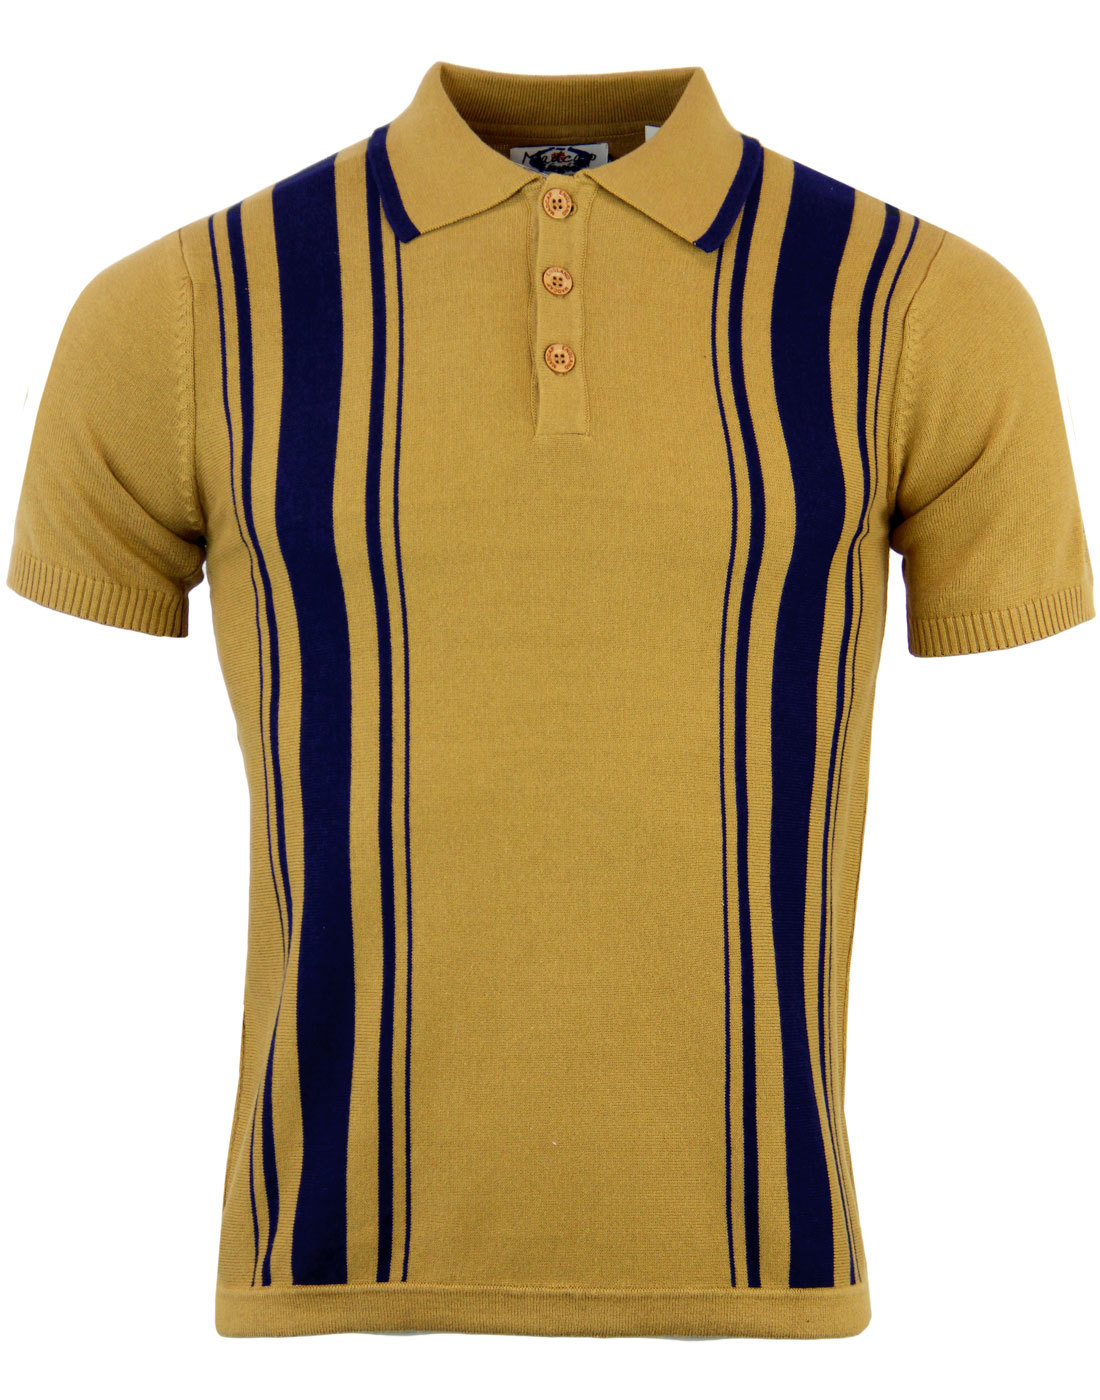 MADCAP ENGLAND Aftermath Retro 1960s Mod Knitted Stripe Polo Top